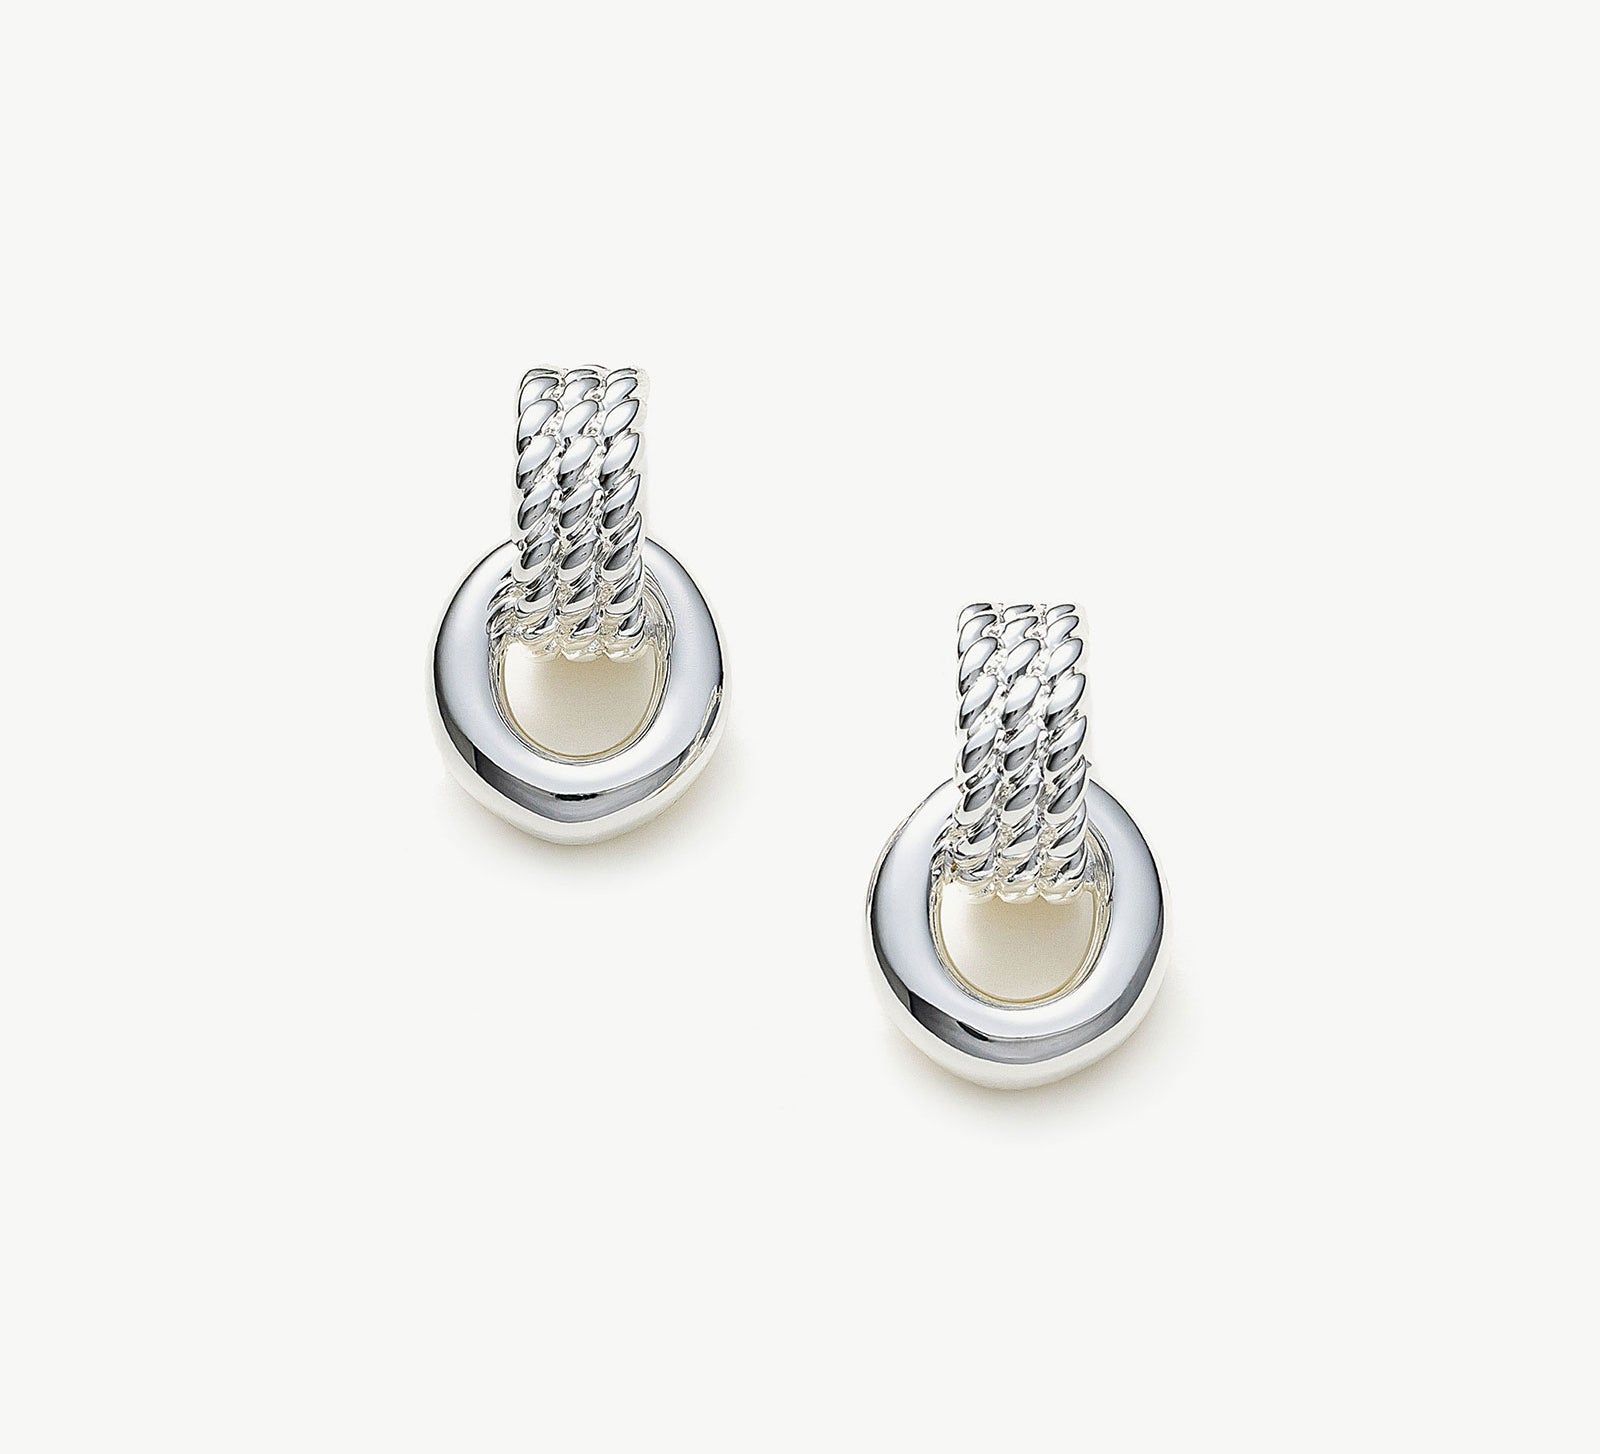  Ring Entwine Chunky Earrings in Silver, showcasing a sleek and shiny design, these earrings add a touch of modern sophistication to your ear ensemble